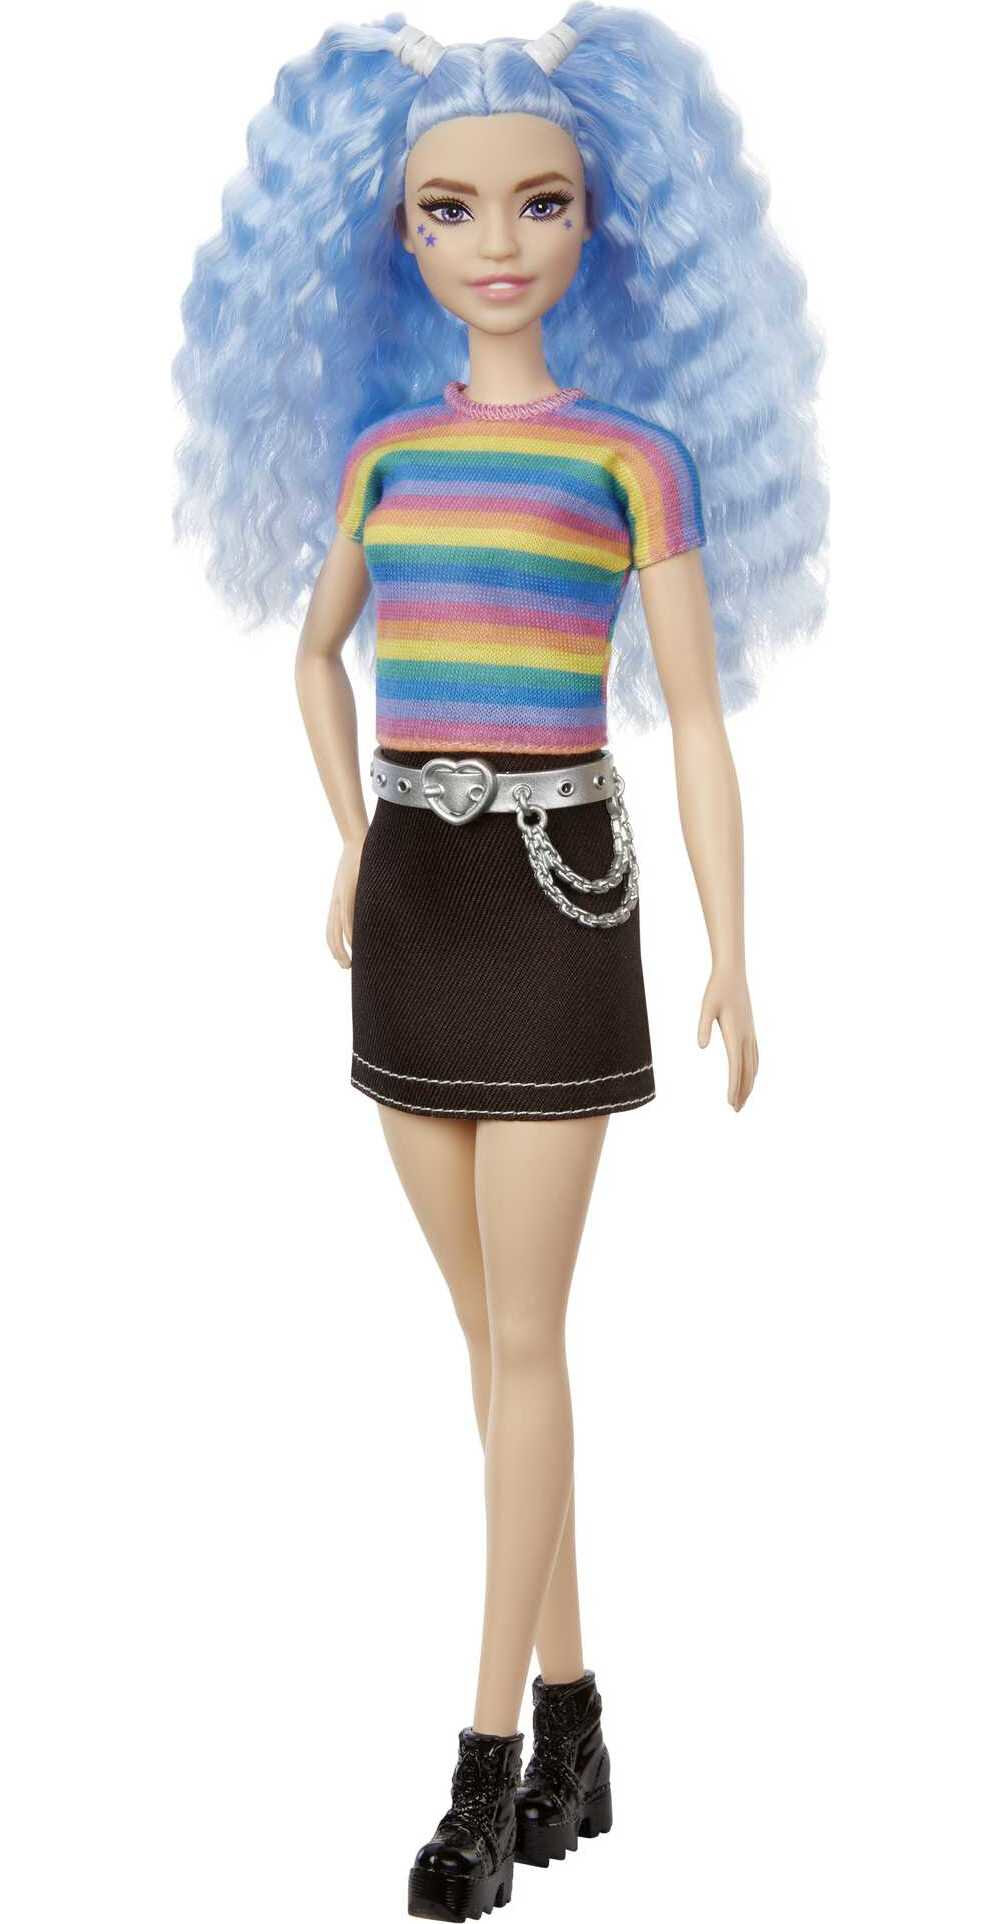 Barbie Fashionistas Doll #170 with Long Blue Crimped Hair, Star Face Makeup in Striped Tee - image 1 of 7